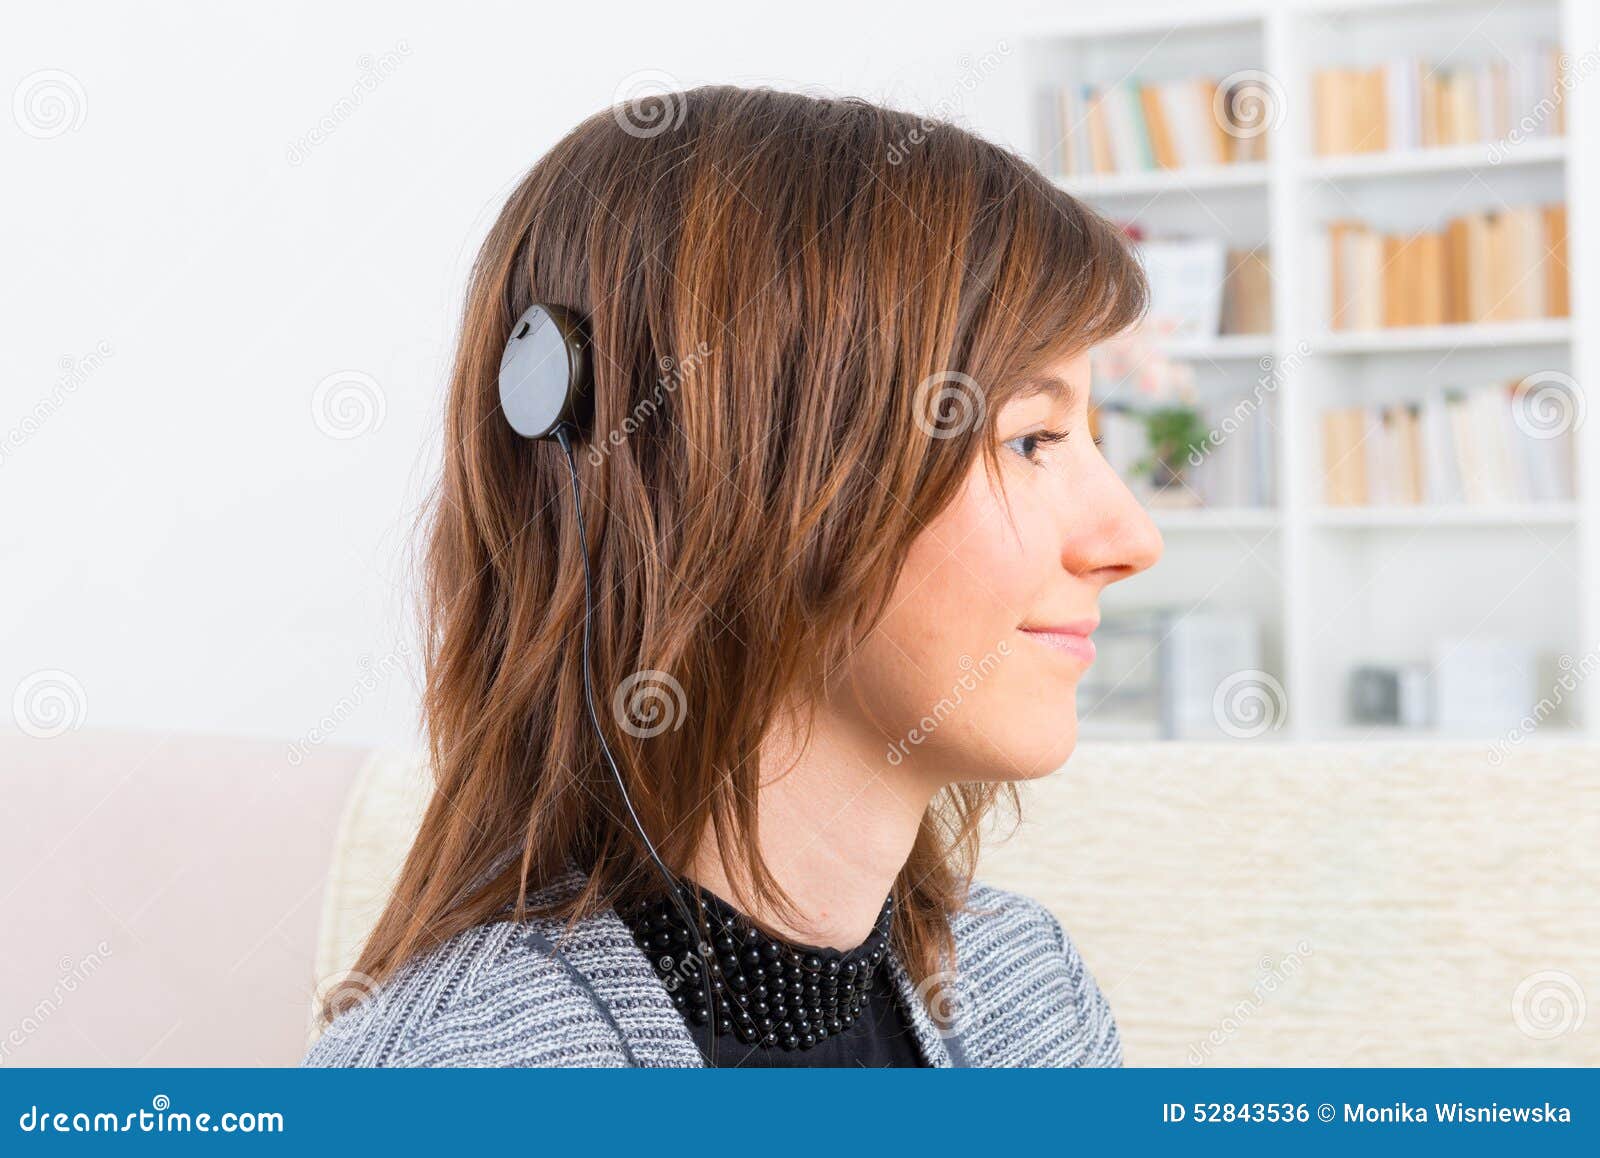 woman showing cochlear implant